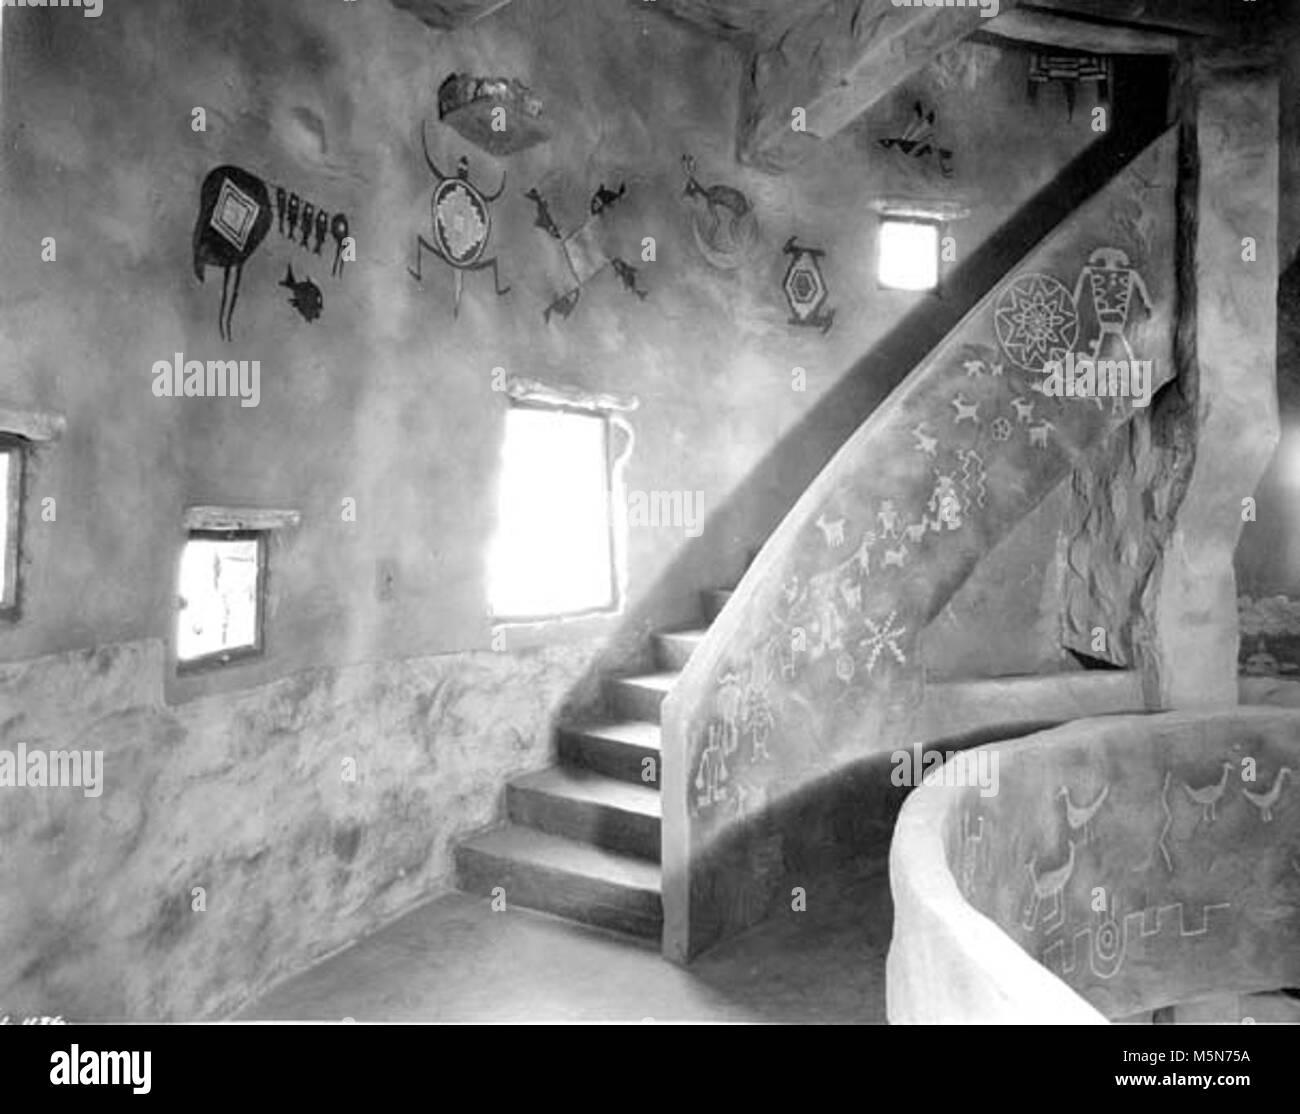 Grand Canyon Historic- Desert View Watchtower Interior c . DESERT VIEW WATCHTOWER. INTERIOR STAIRWAY TO SECOND GALLERY. 3 WINDOWS. GRCA 15955. CIRCA 1932. FRED HARVEY CO. Stock Photo